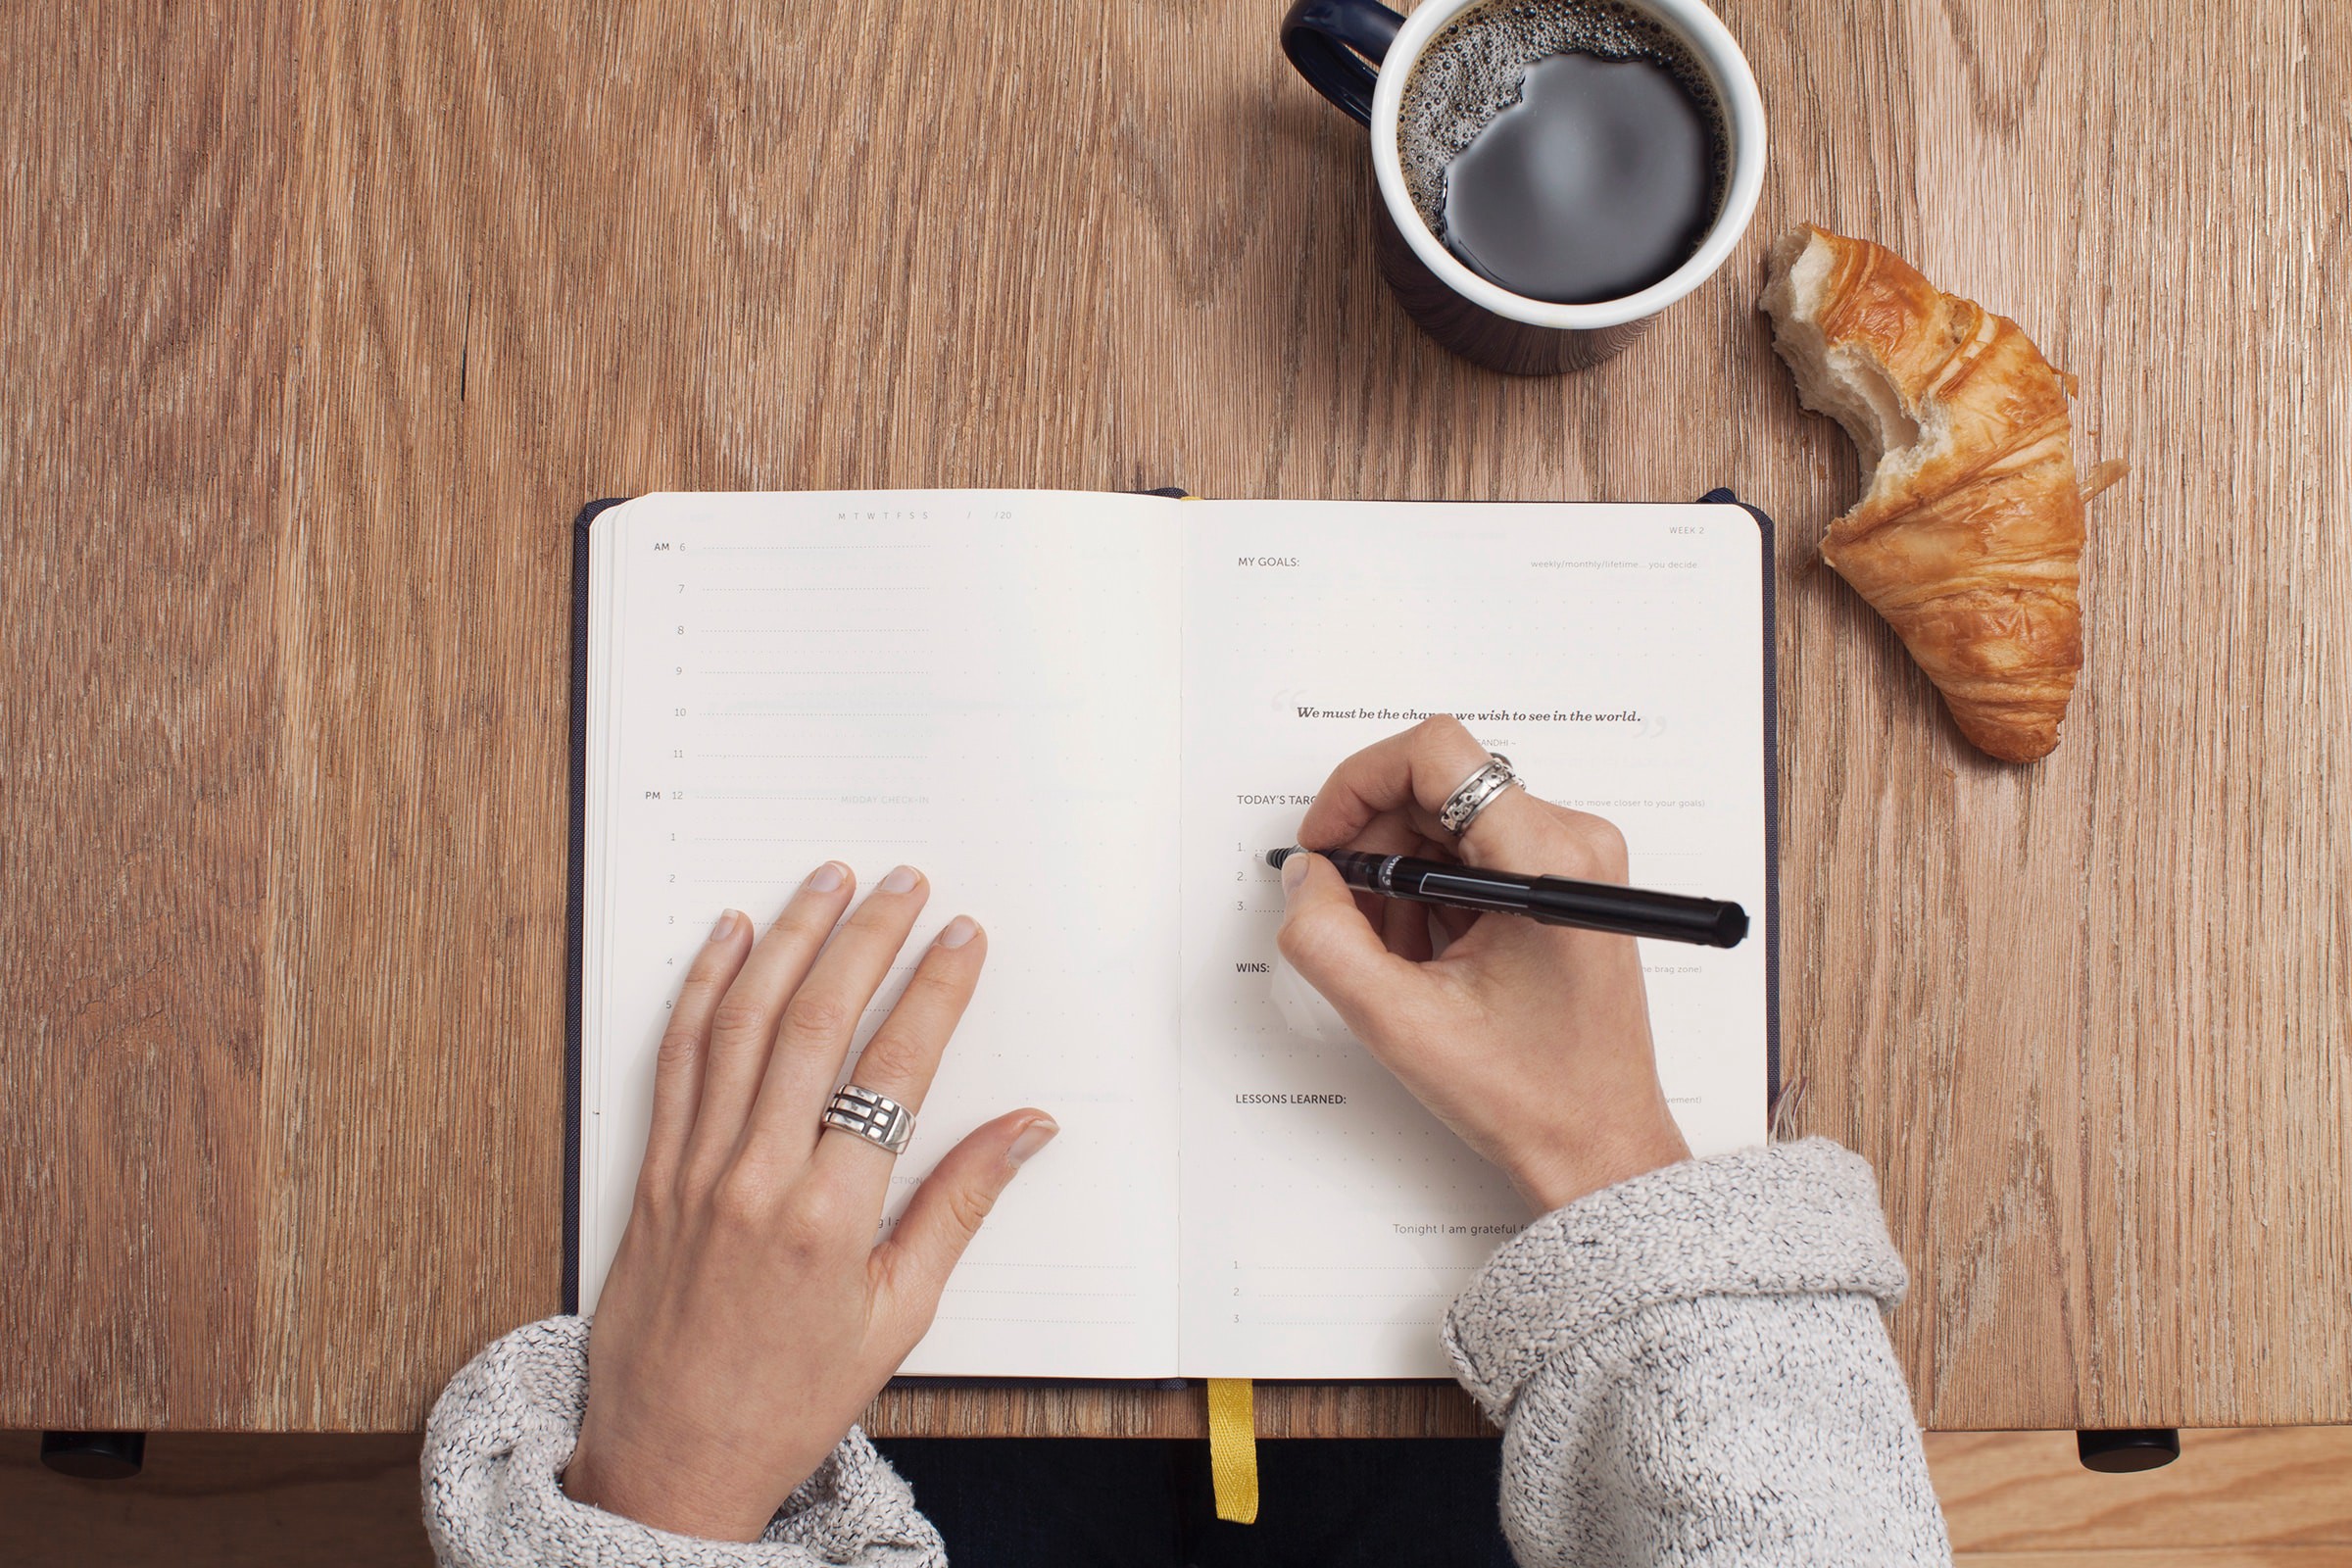 Start Filling in your Outline by Free Writing